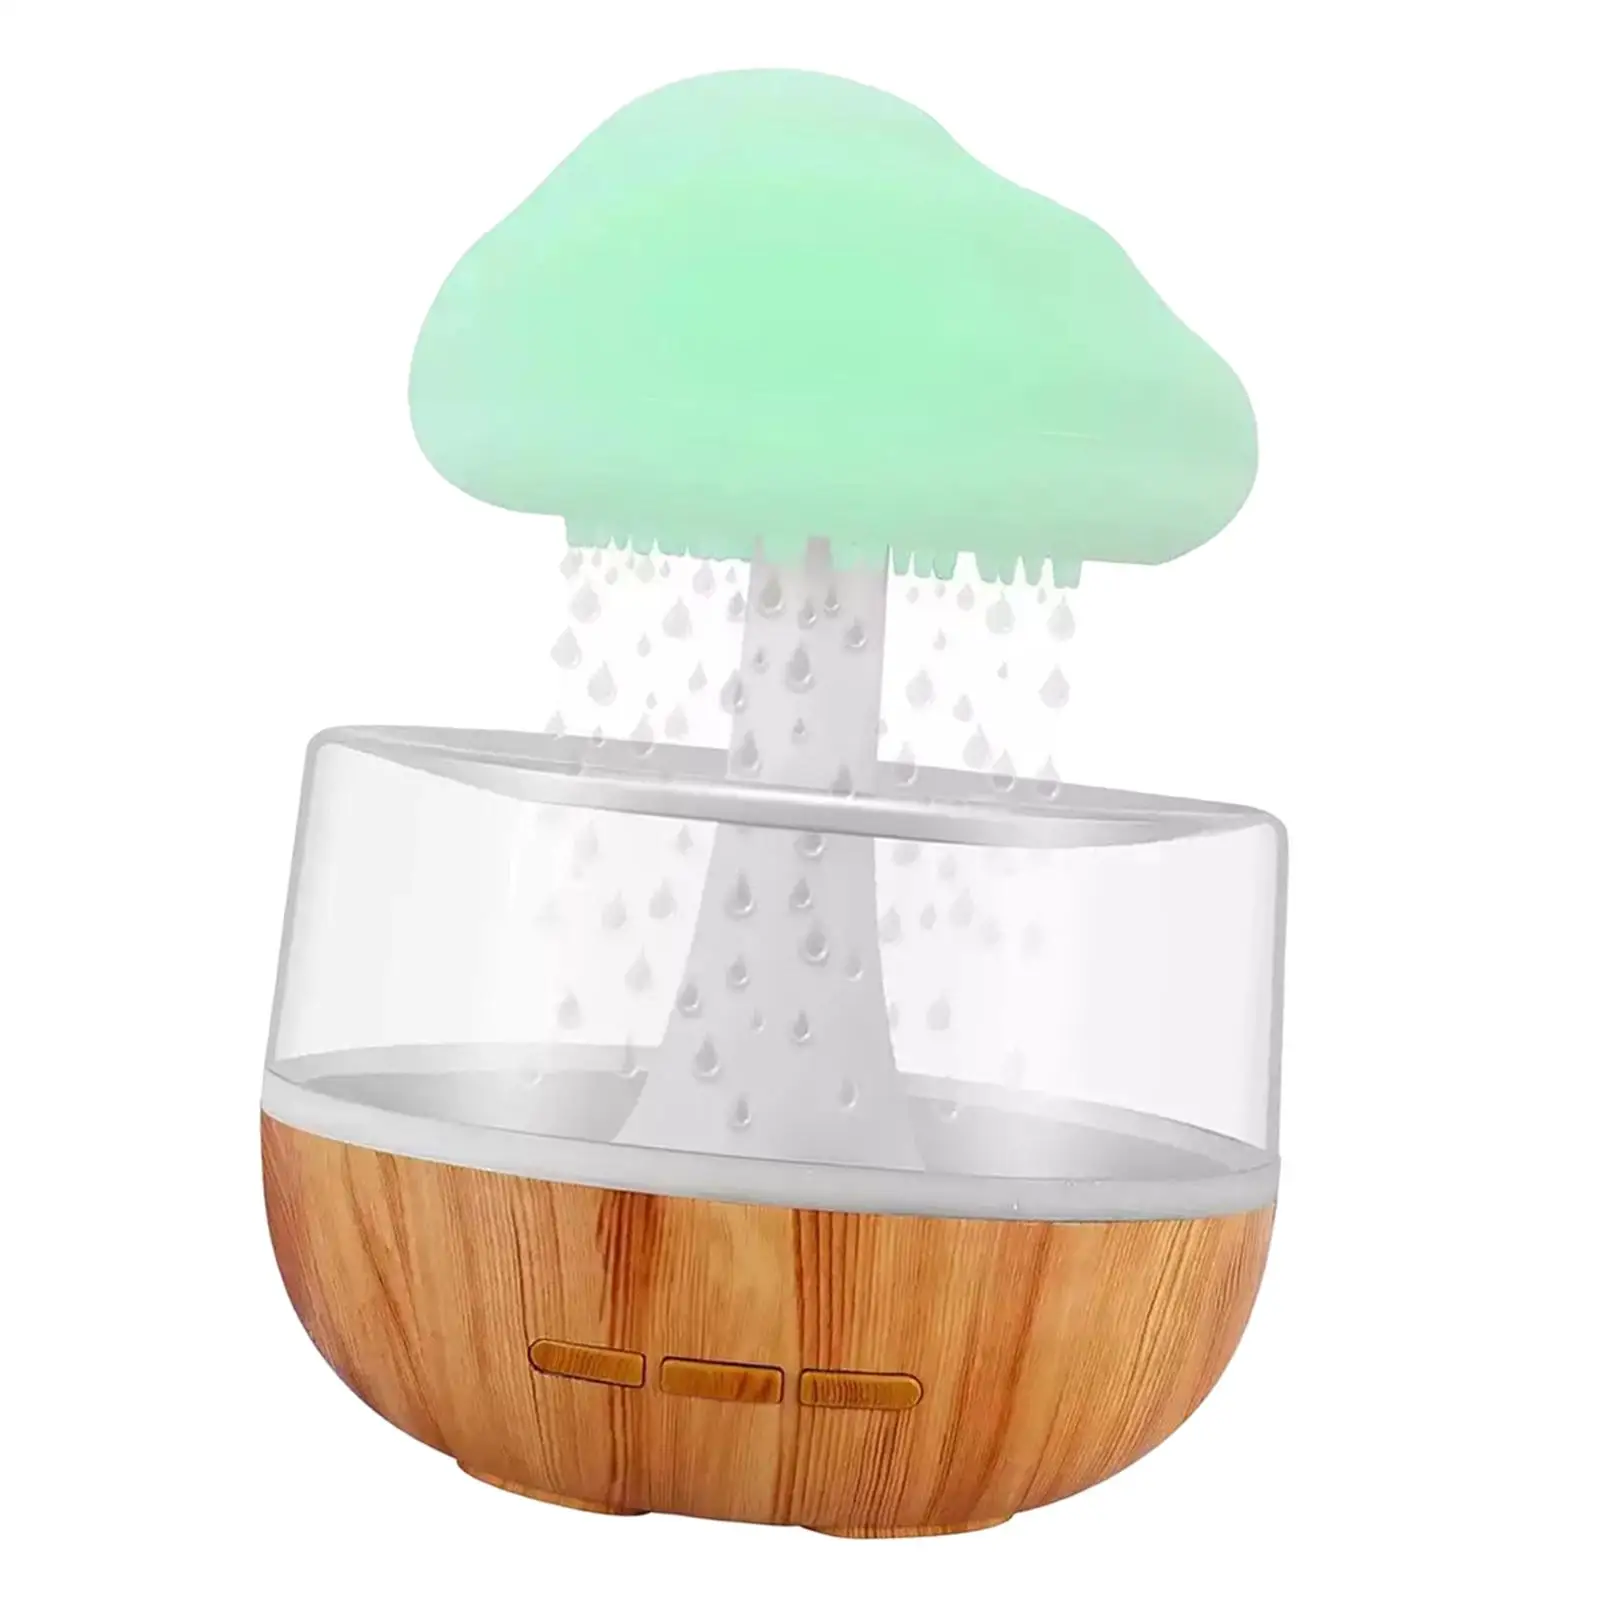 Colorful Air Humidifier Decor Centerpieces Quiet Scene Layout Air Purifier with Light Diffuser for Bedroom Desktop